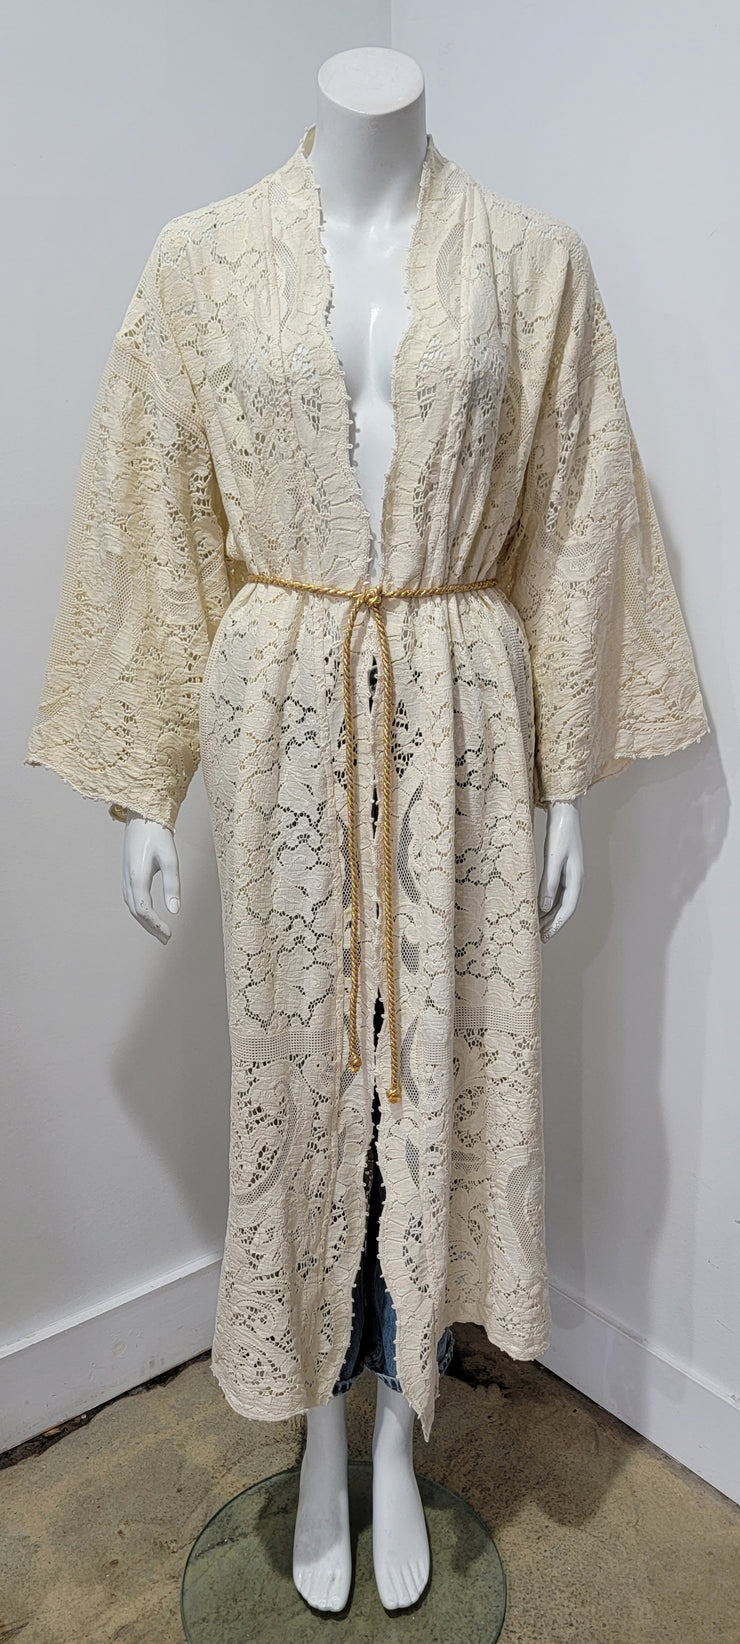 Vintage Upcycled 19th-20th Century Quaker Scallop Lace Boho Festival Duster Rope Belted Robe